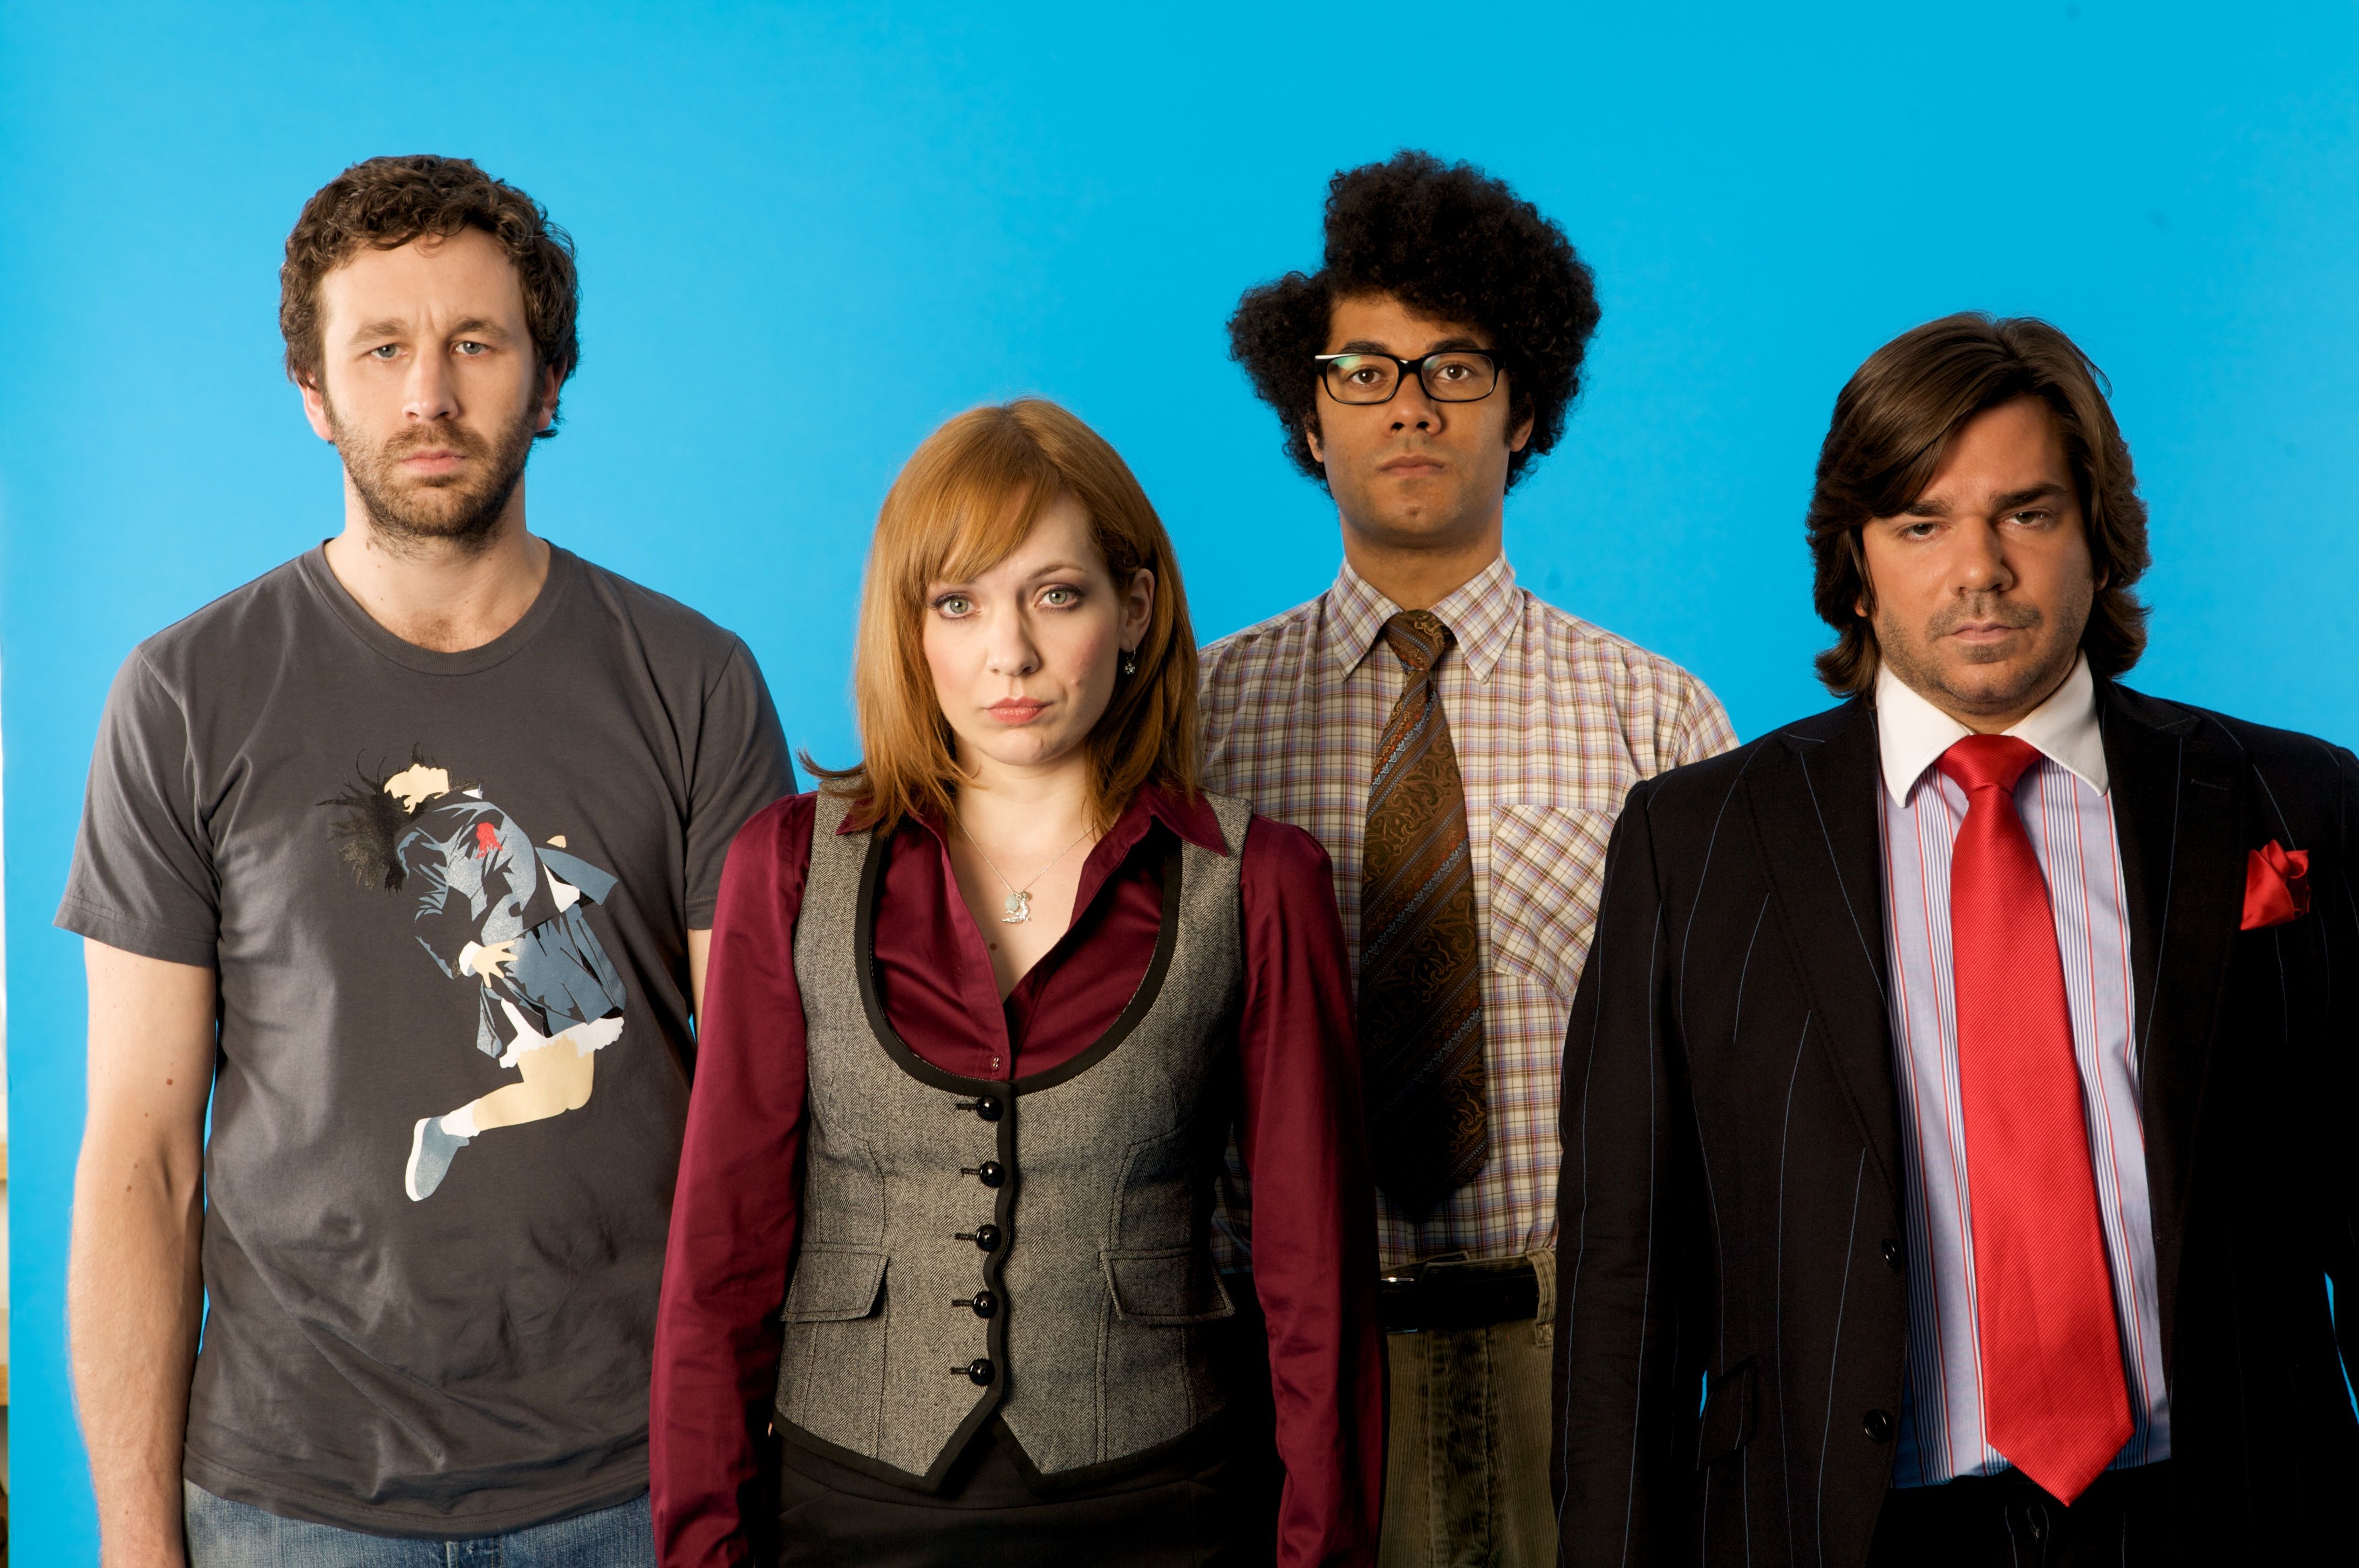 The IT Crowd 4k Ultra HD Wallpaper. Background Image